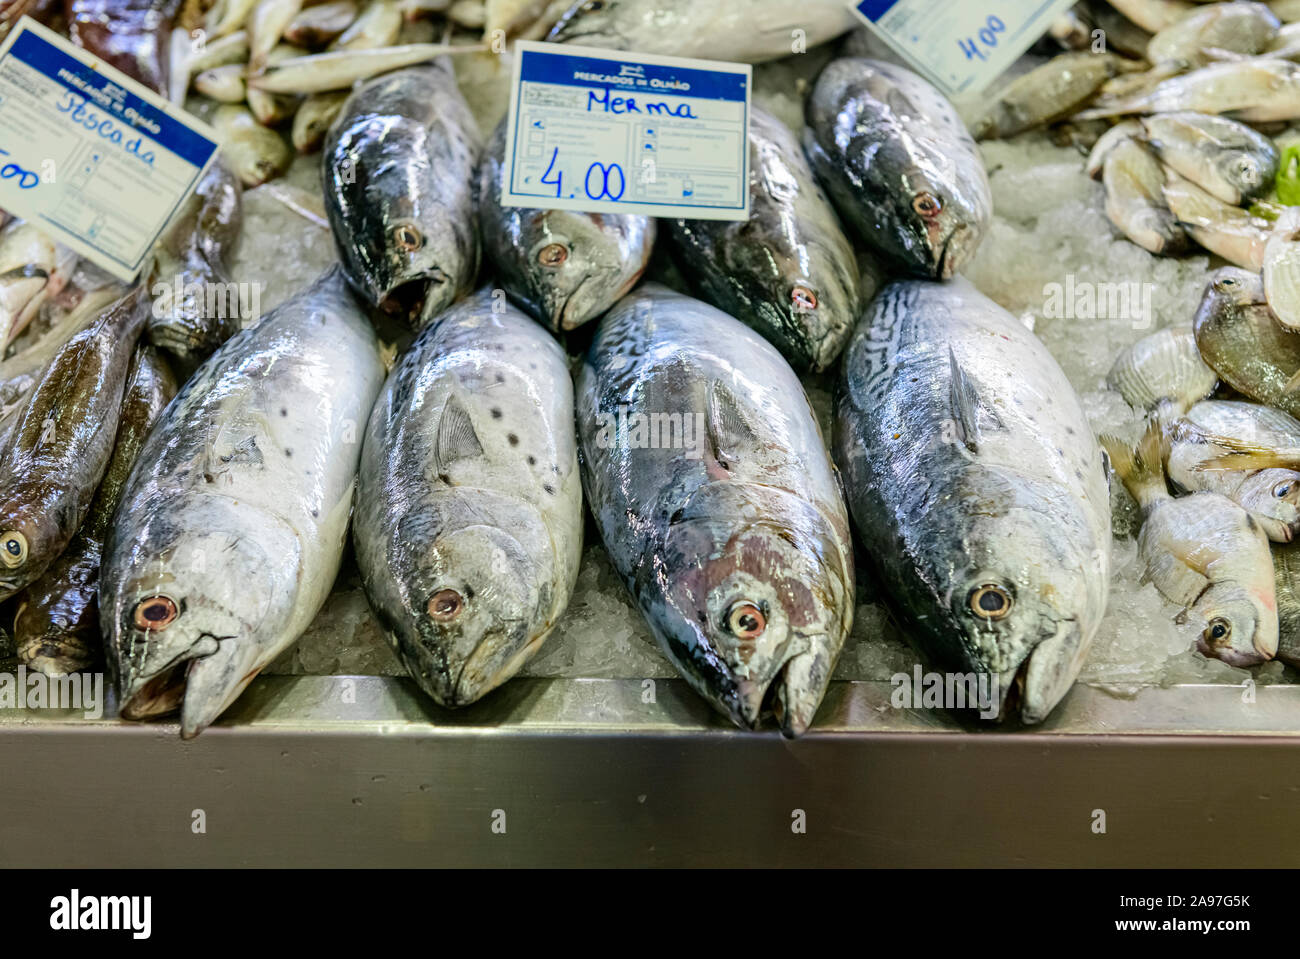 Fishmongers display of fresh Little tunny Euthynnus alletteratus Merma caught the same day in the Olhao fish and produce market. Olhao Algarve, Portug Stock Photo